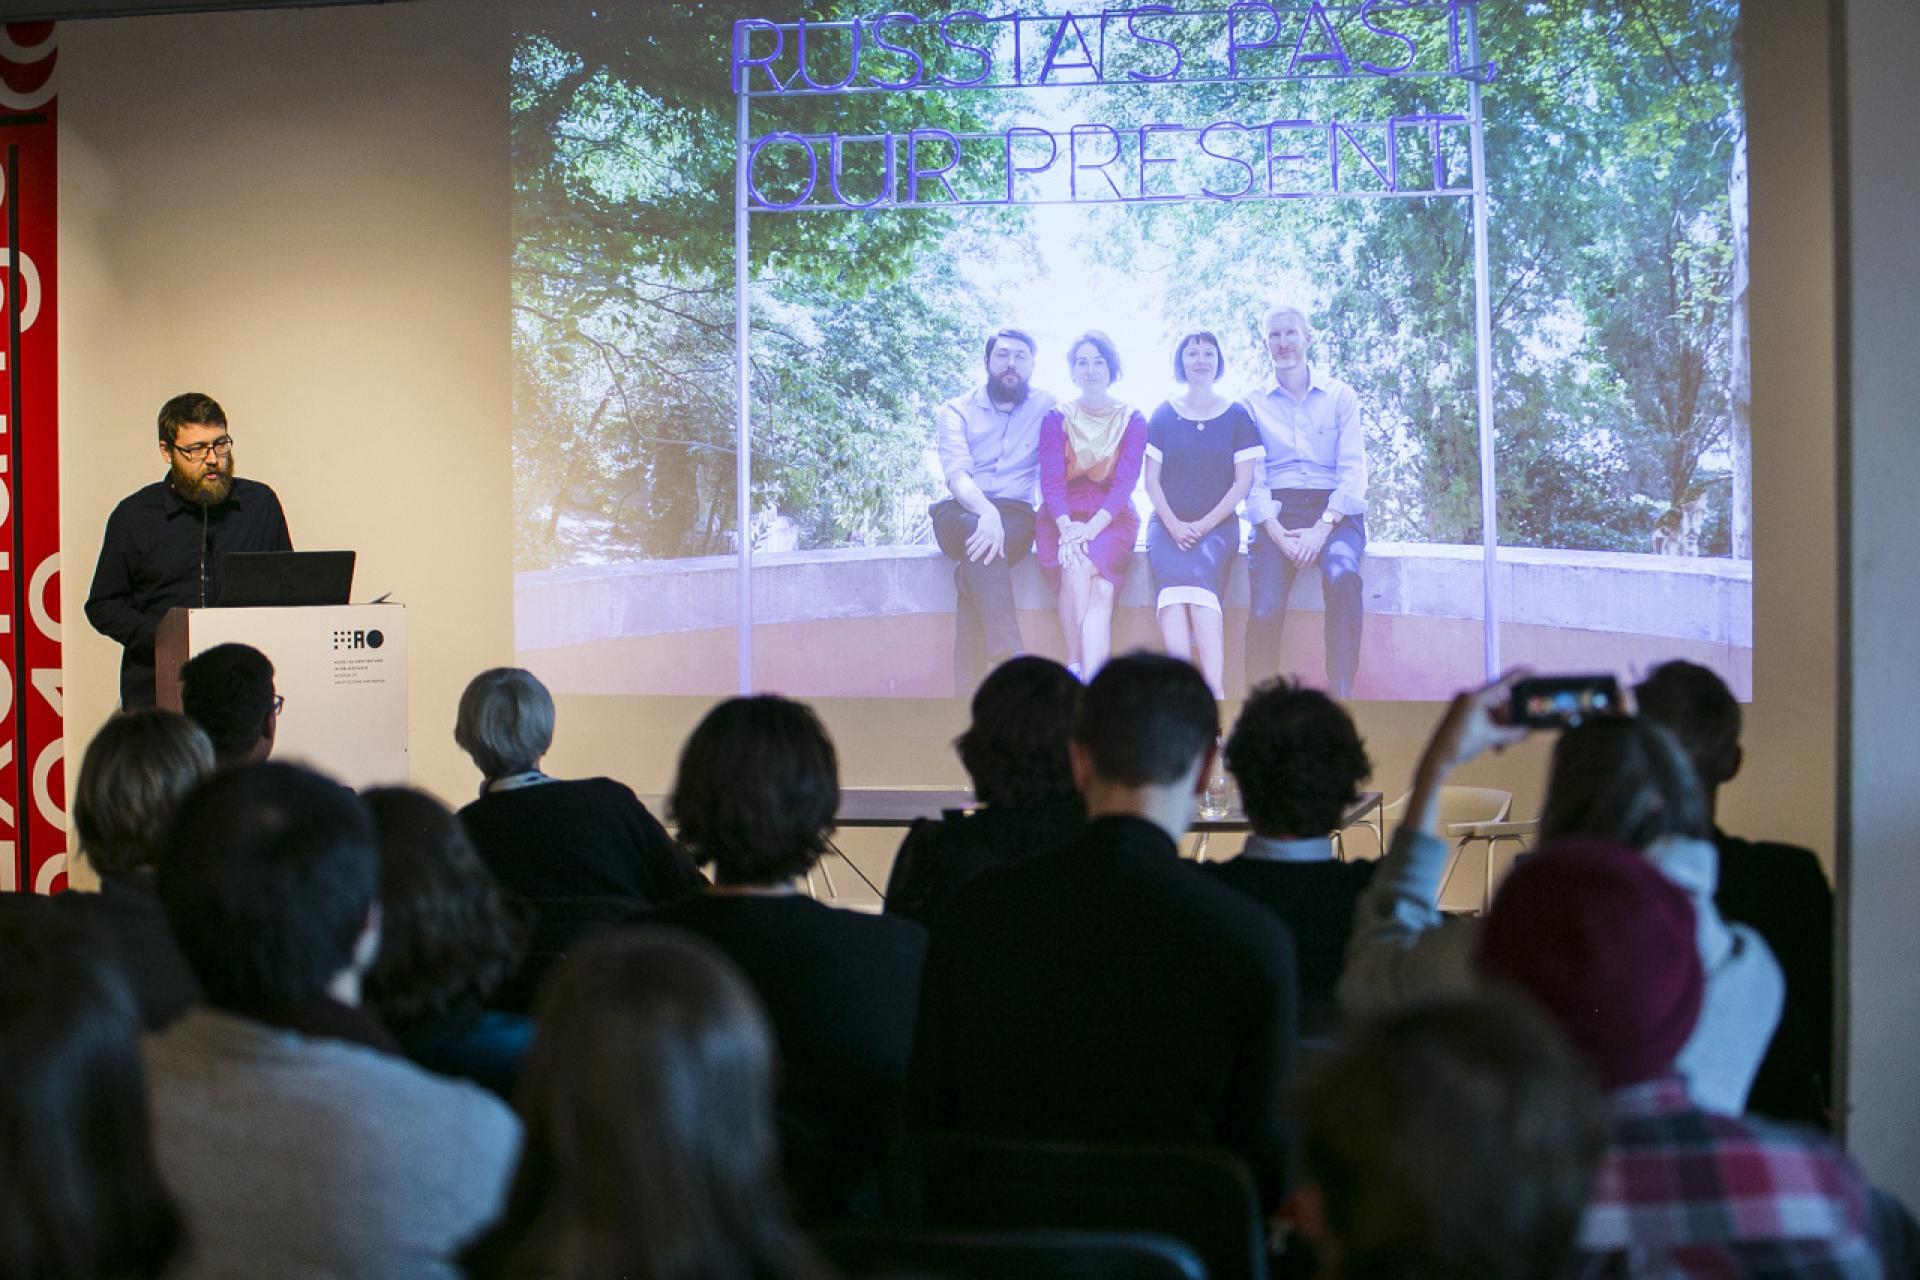 A joint collaboration with Strelka Institute featured projects from Russia.